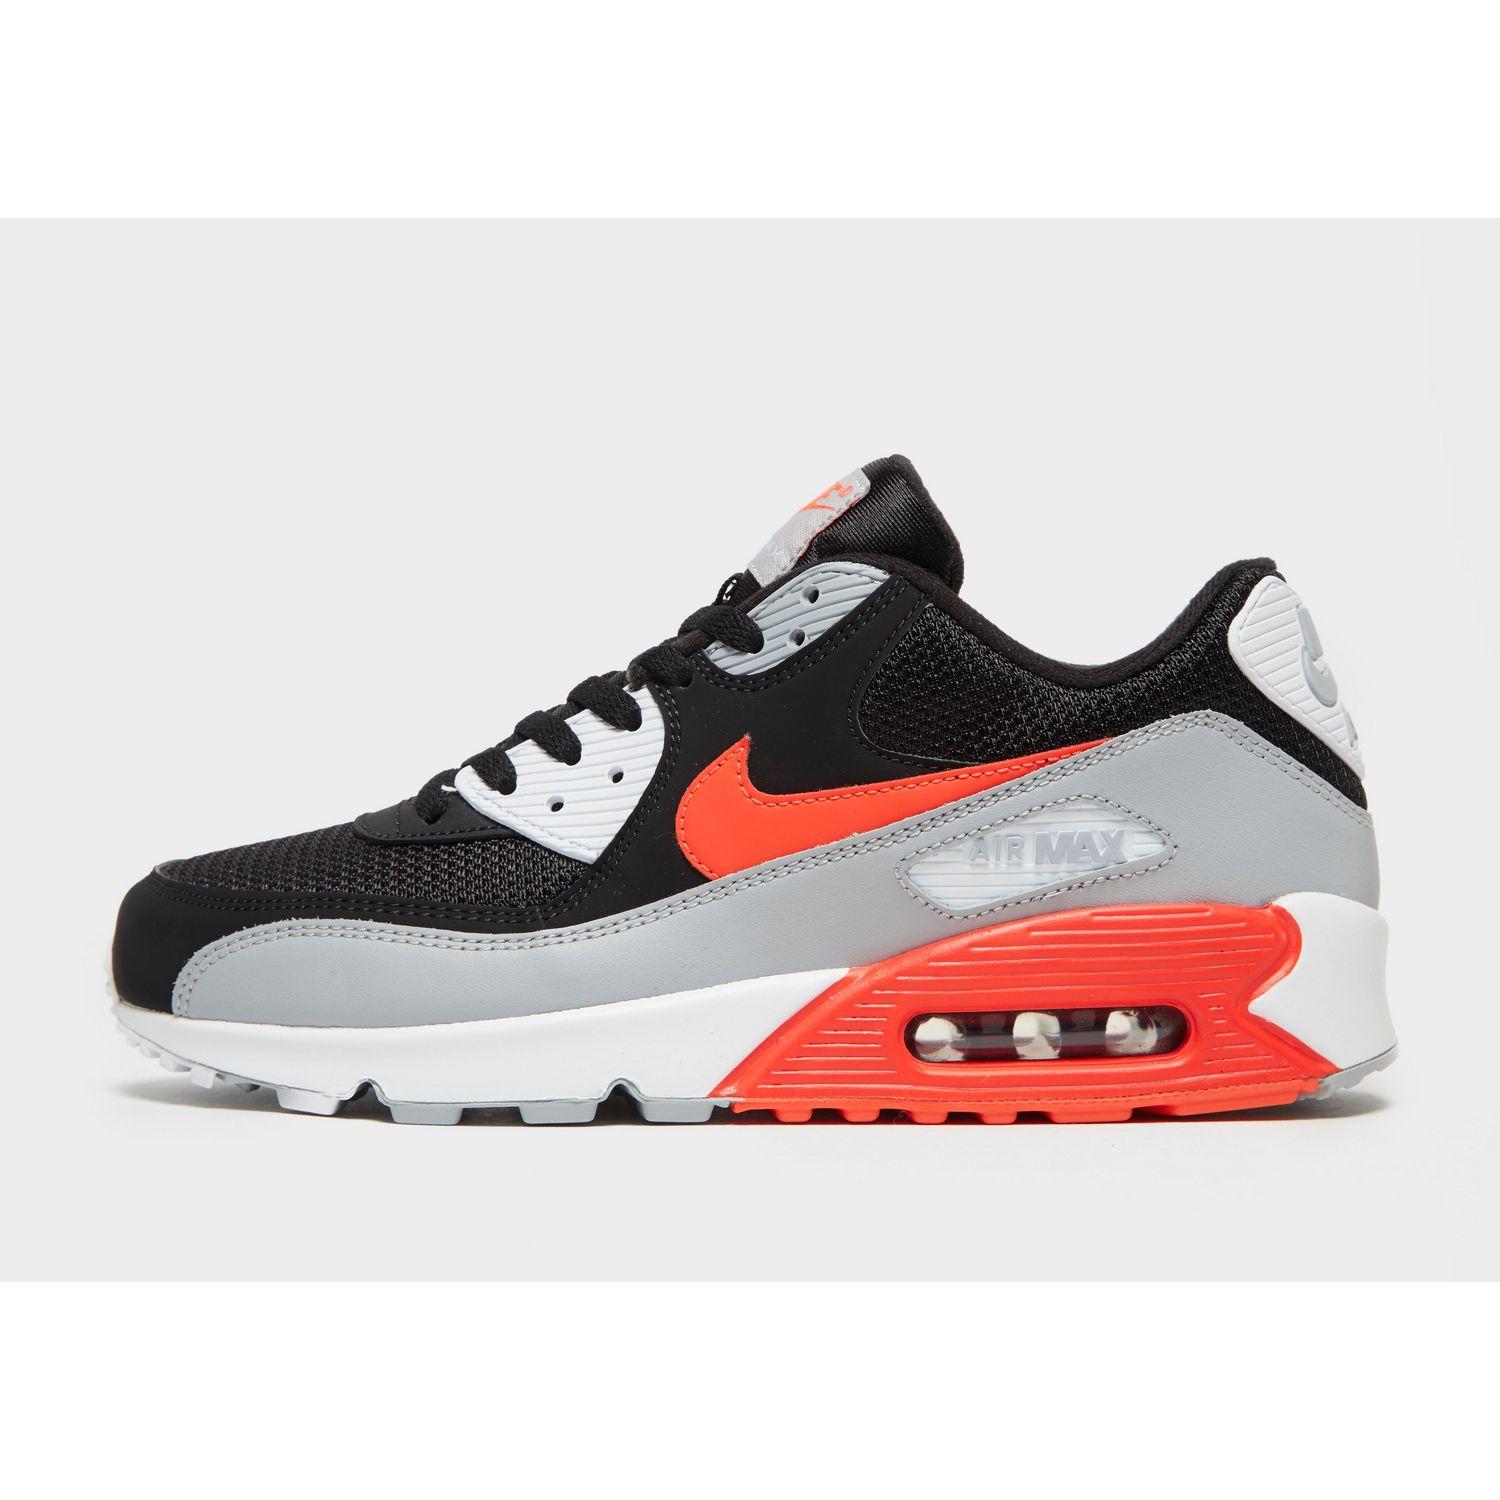 Nike Leather Air Max 90 Essential Og for Men - Lyst